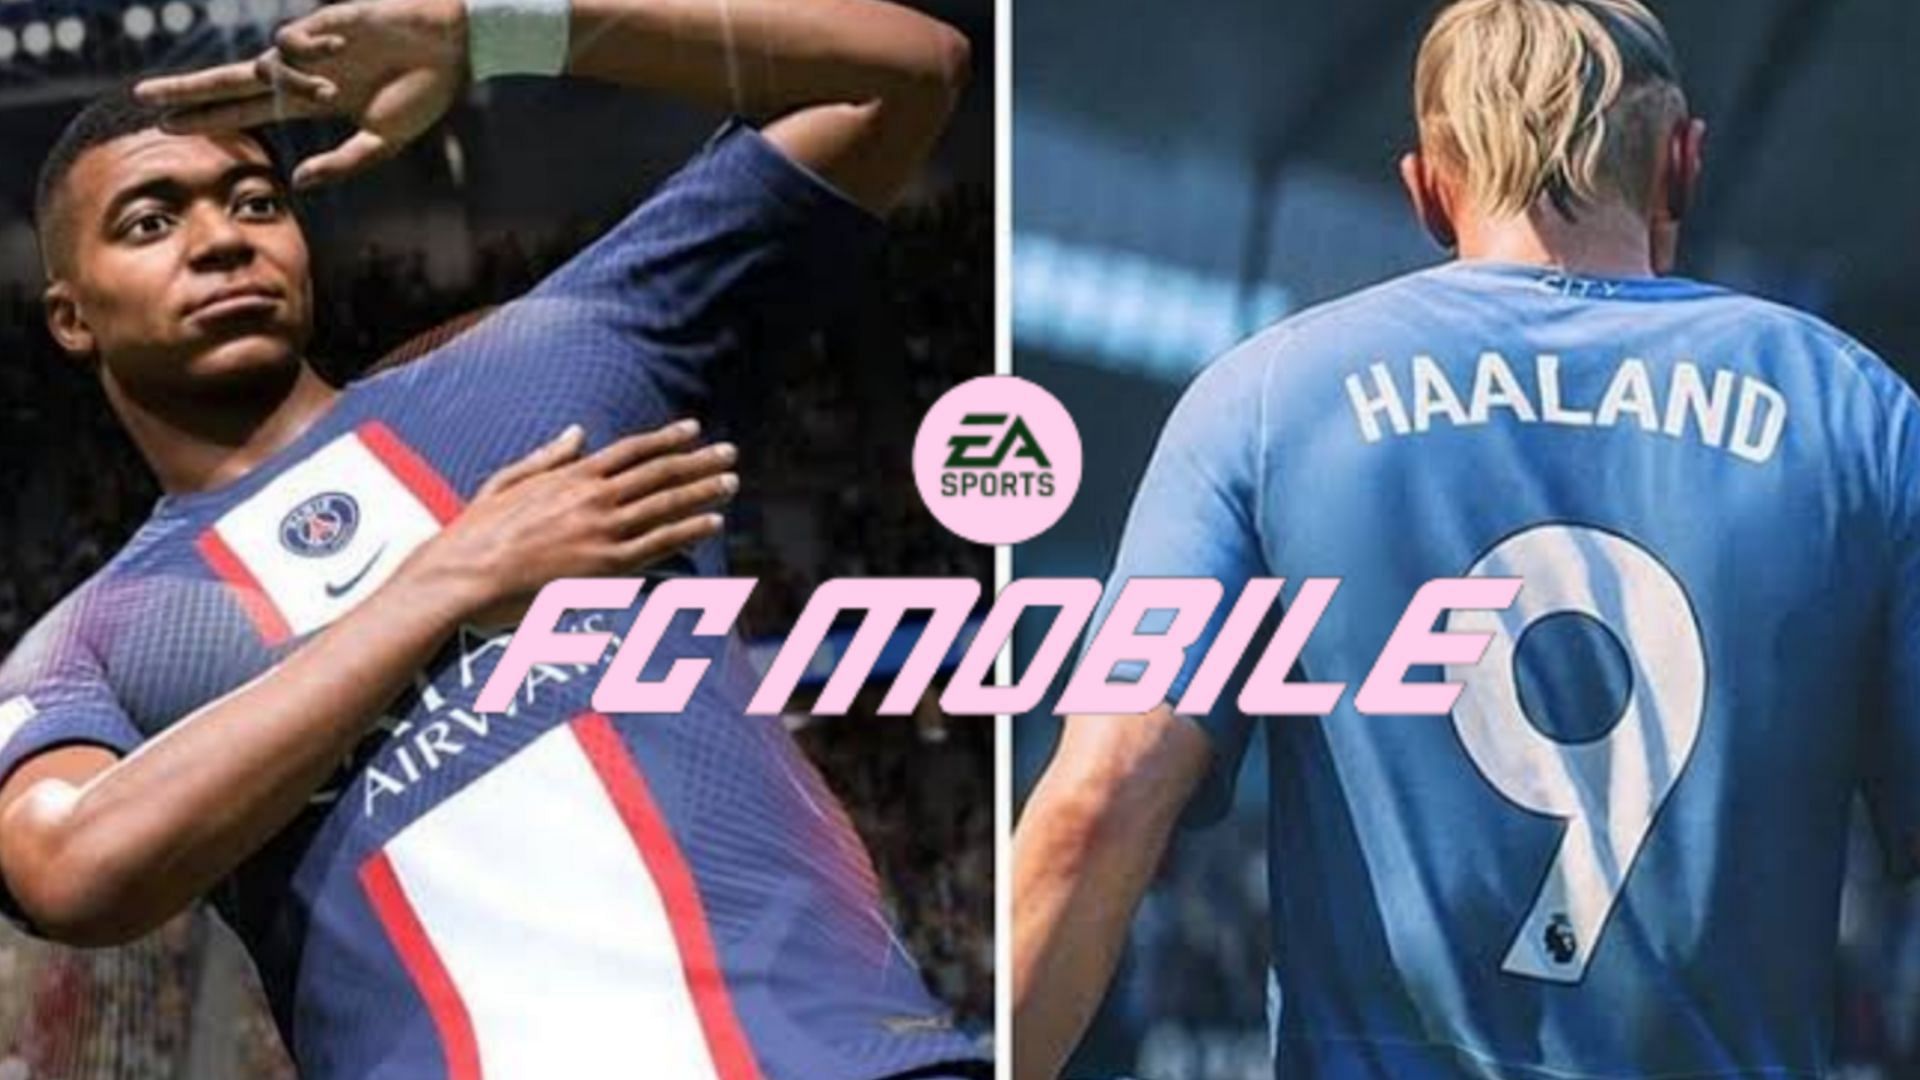 EA Sports FC Mobile 24: Welcome to FC Mobile Event Guide 